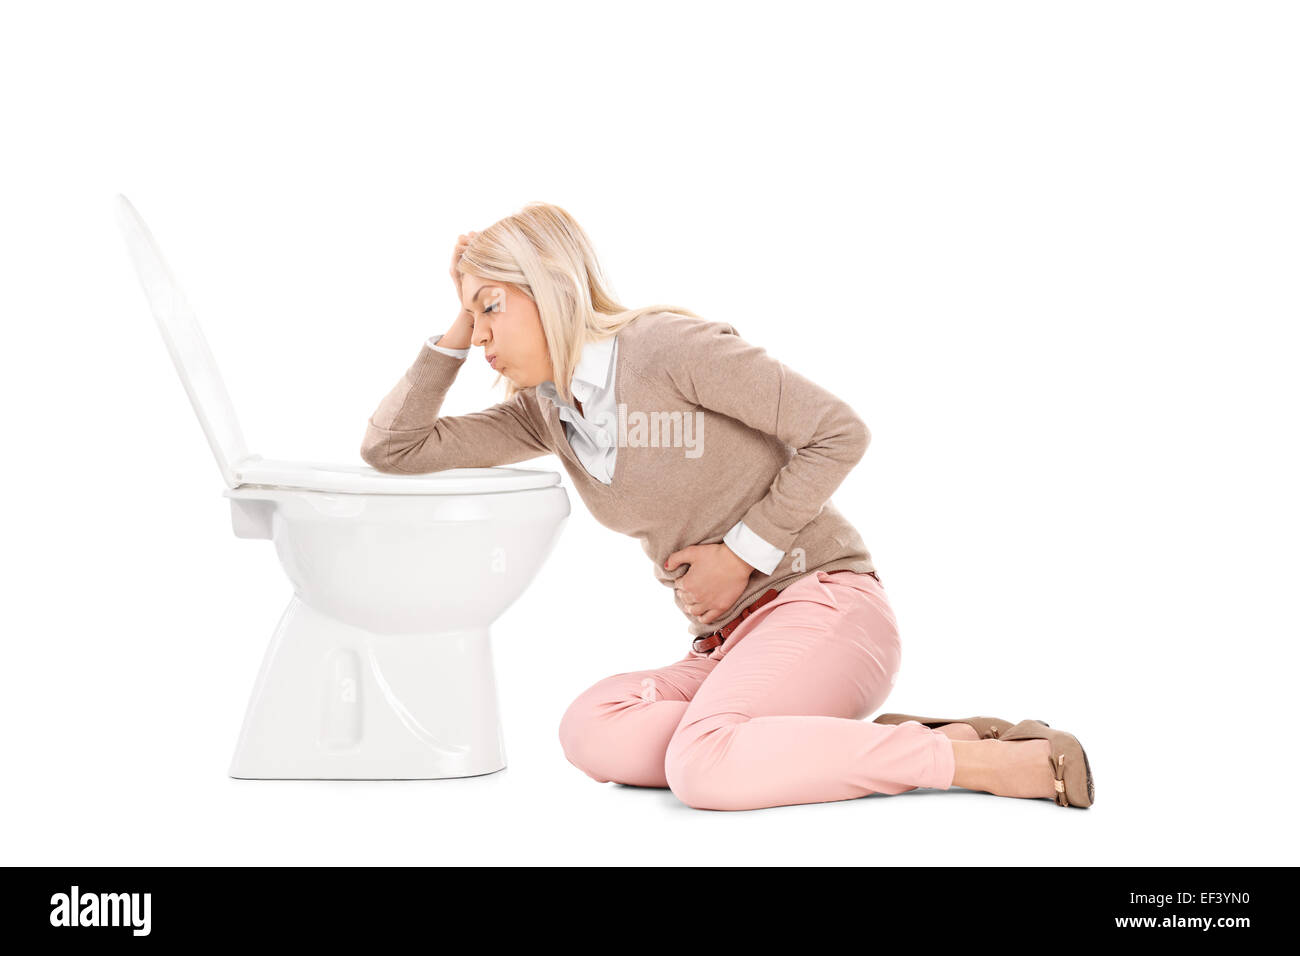 Woman throwing up in the toilet isolated on white background Stock Photo